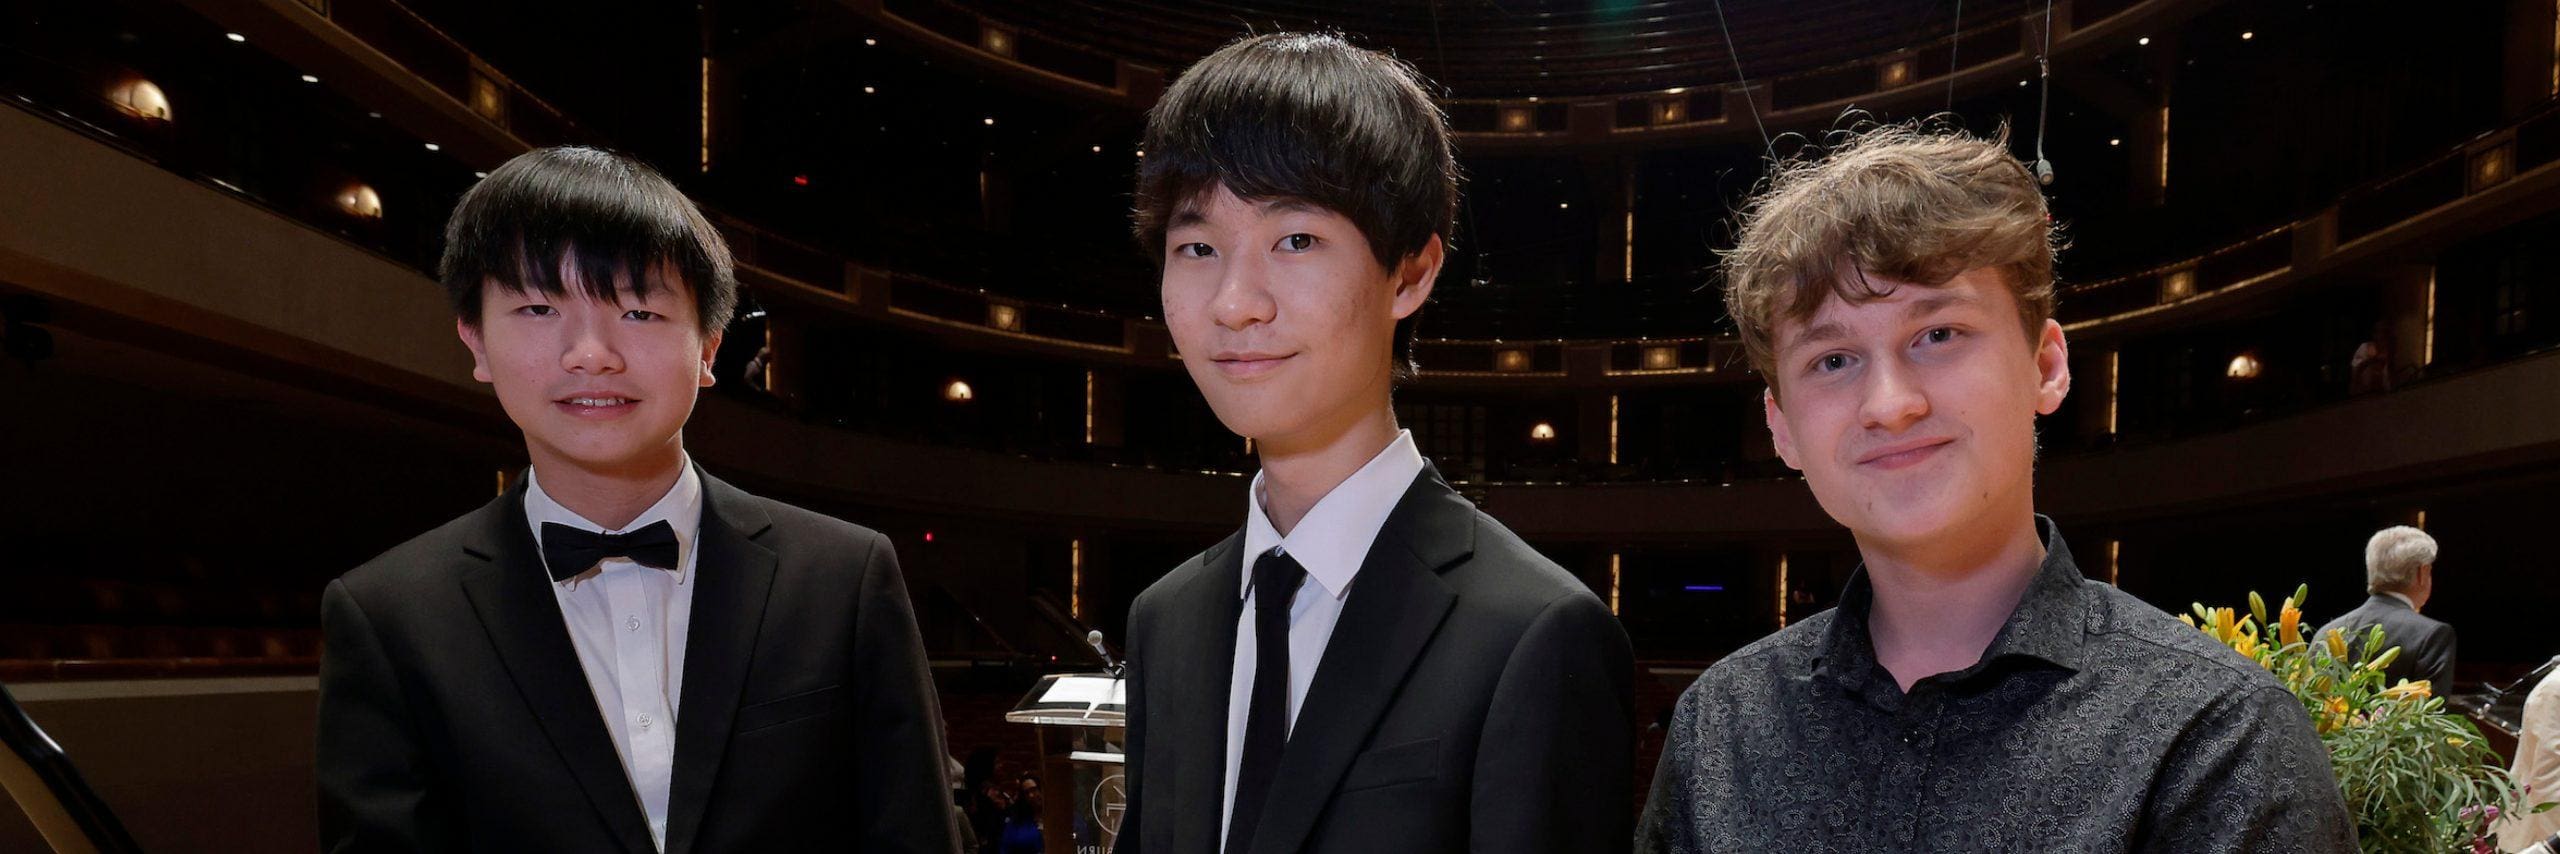 NEC Prep student Seokyoung Hong (center) with fellow finalists Yifan Wu (left) and Jan Schulmeister (right).